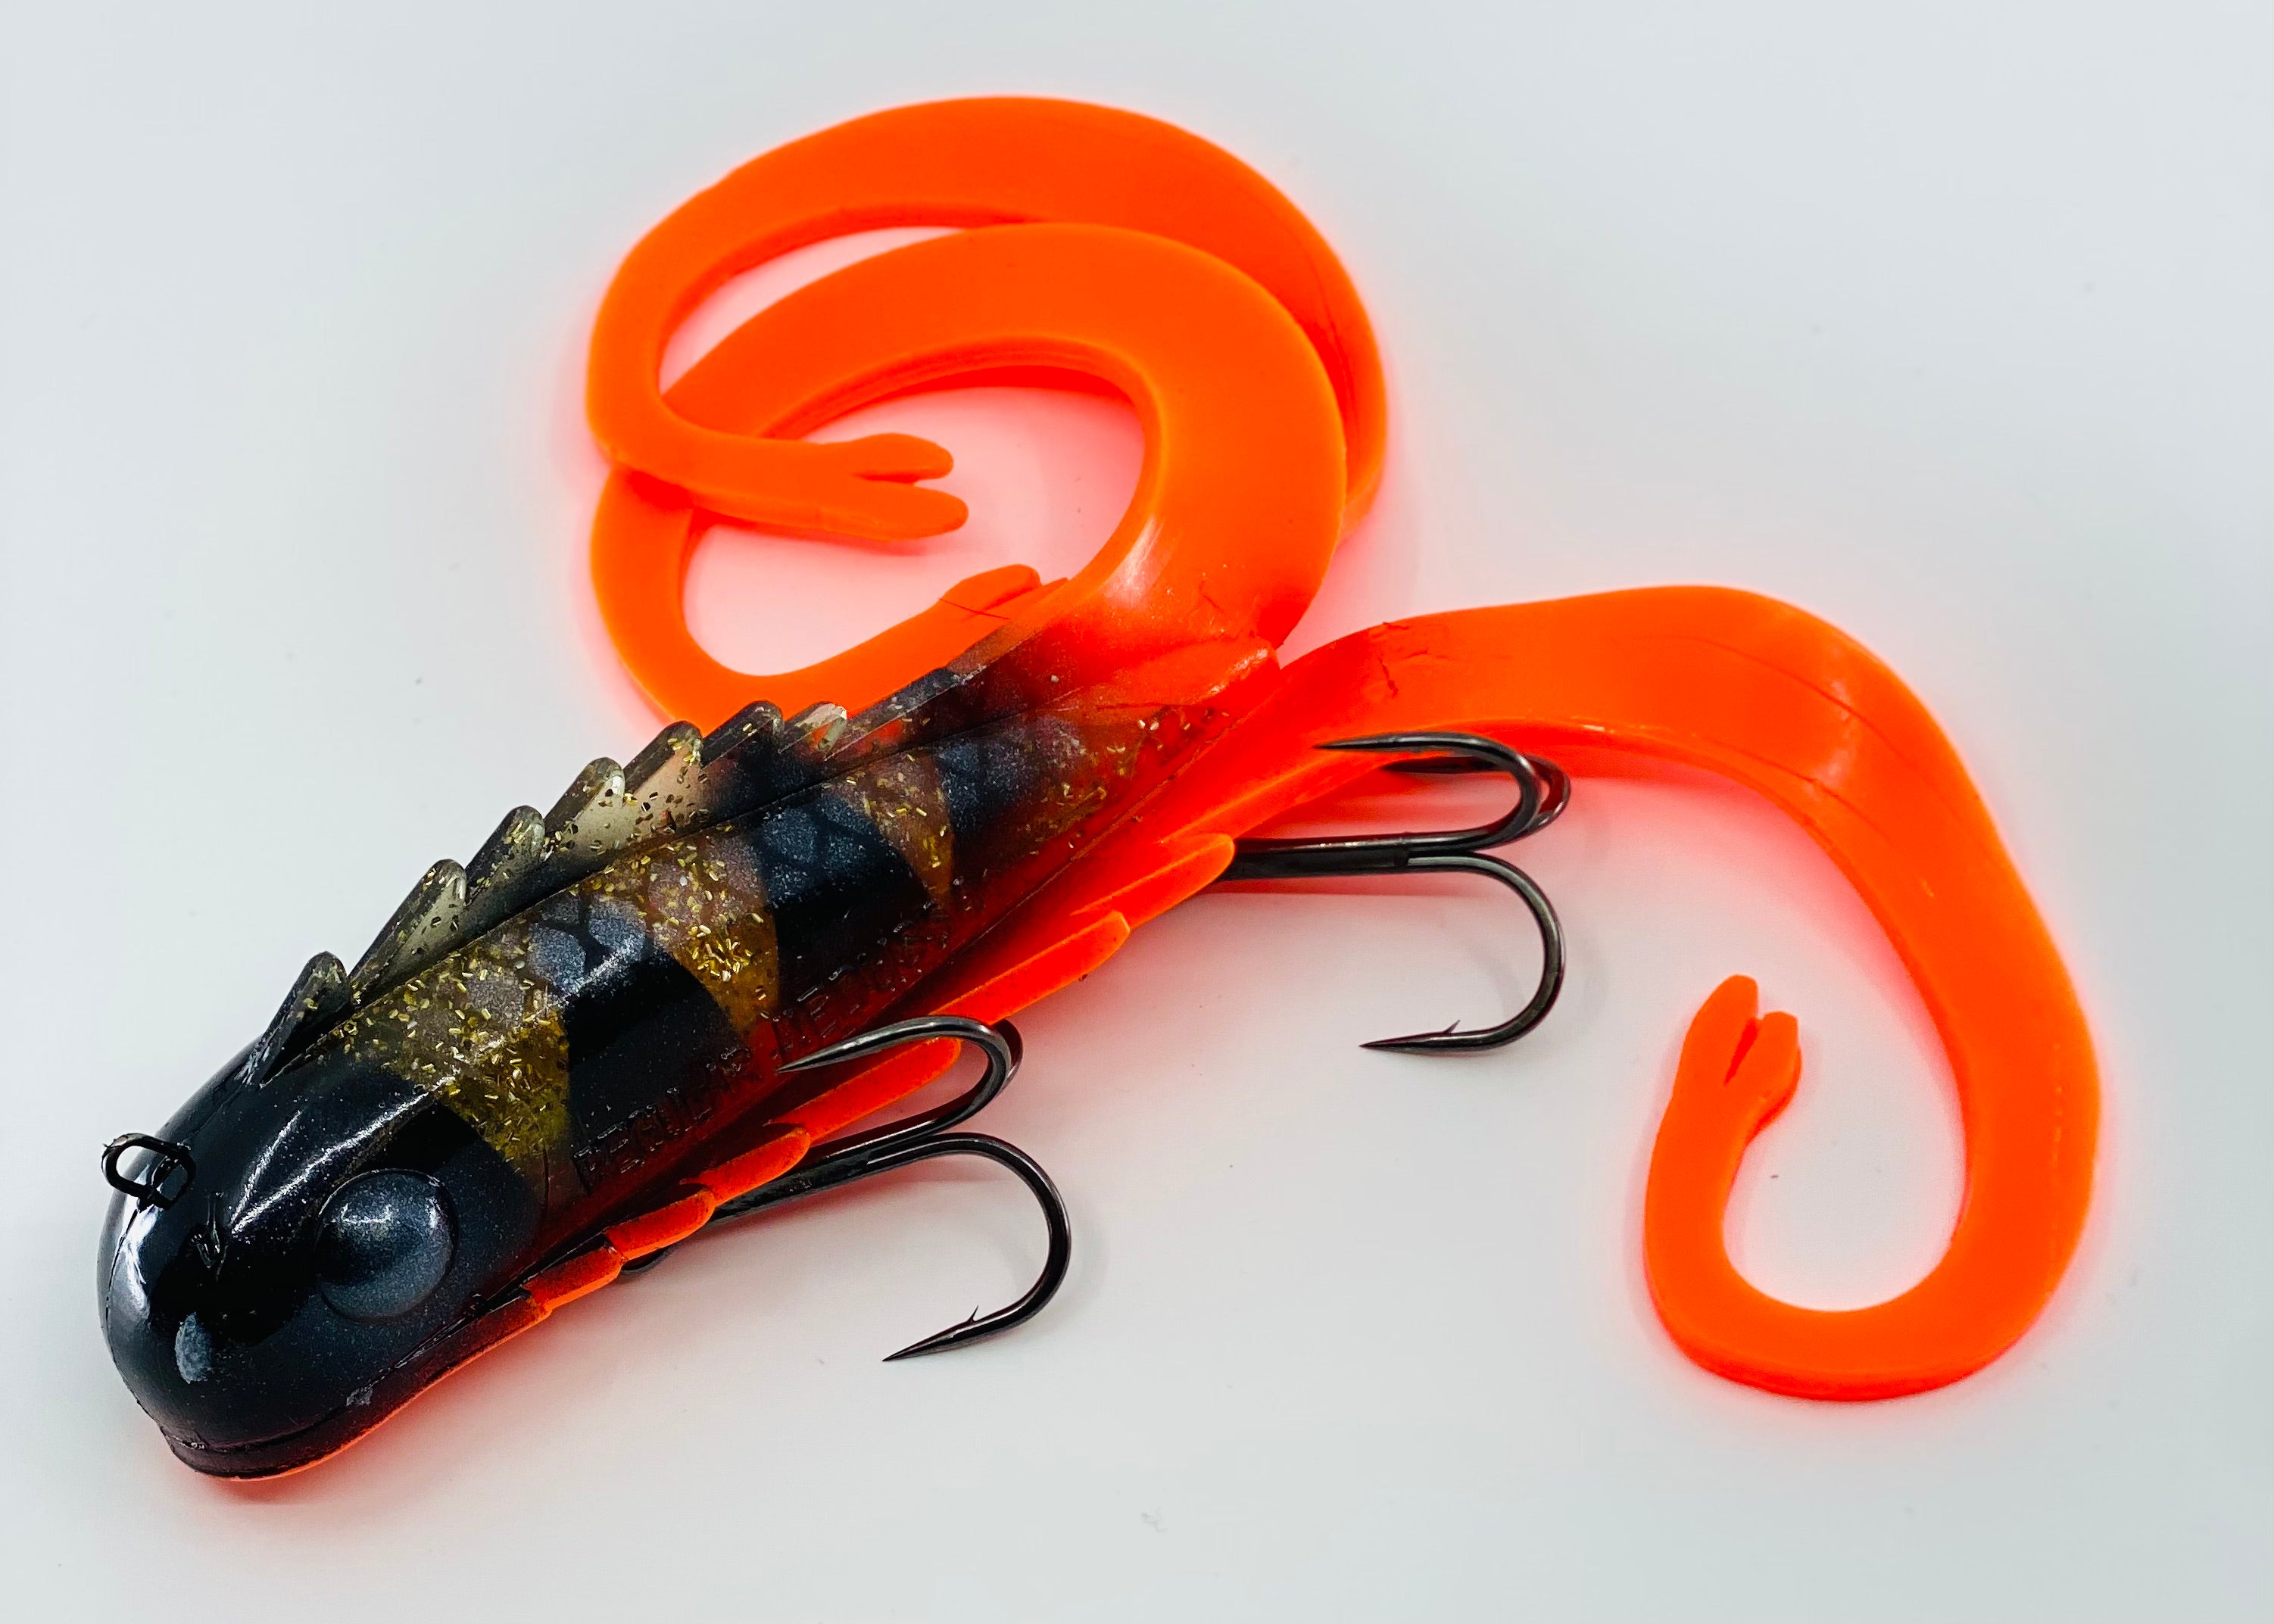 MuskieFIRST  Favorite medussa color » Lures,Tackle, and Equipment » Muskie  Fishing